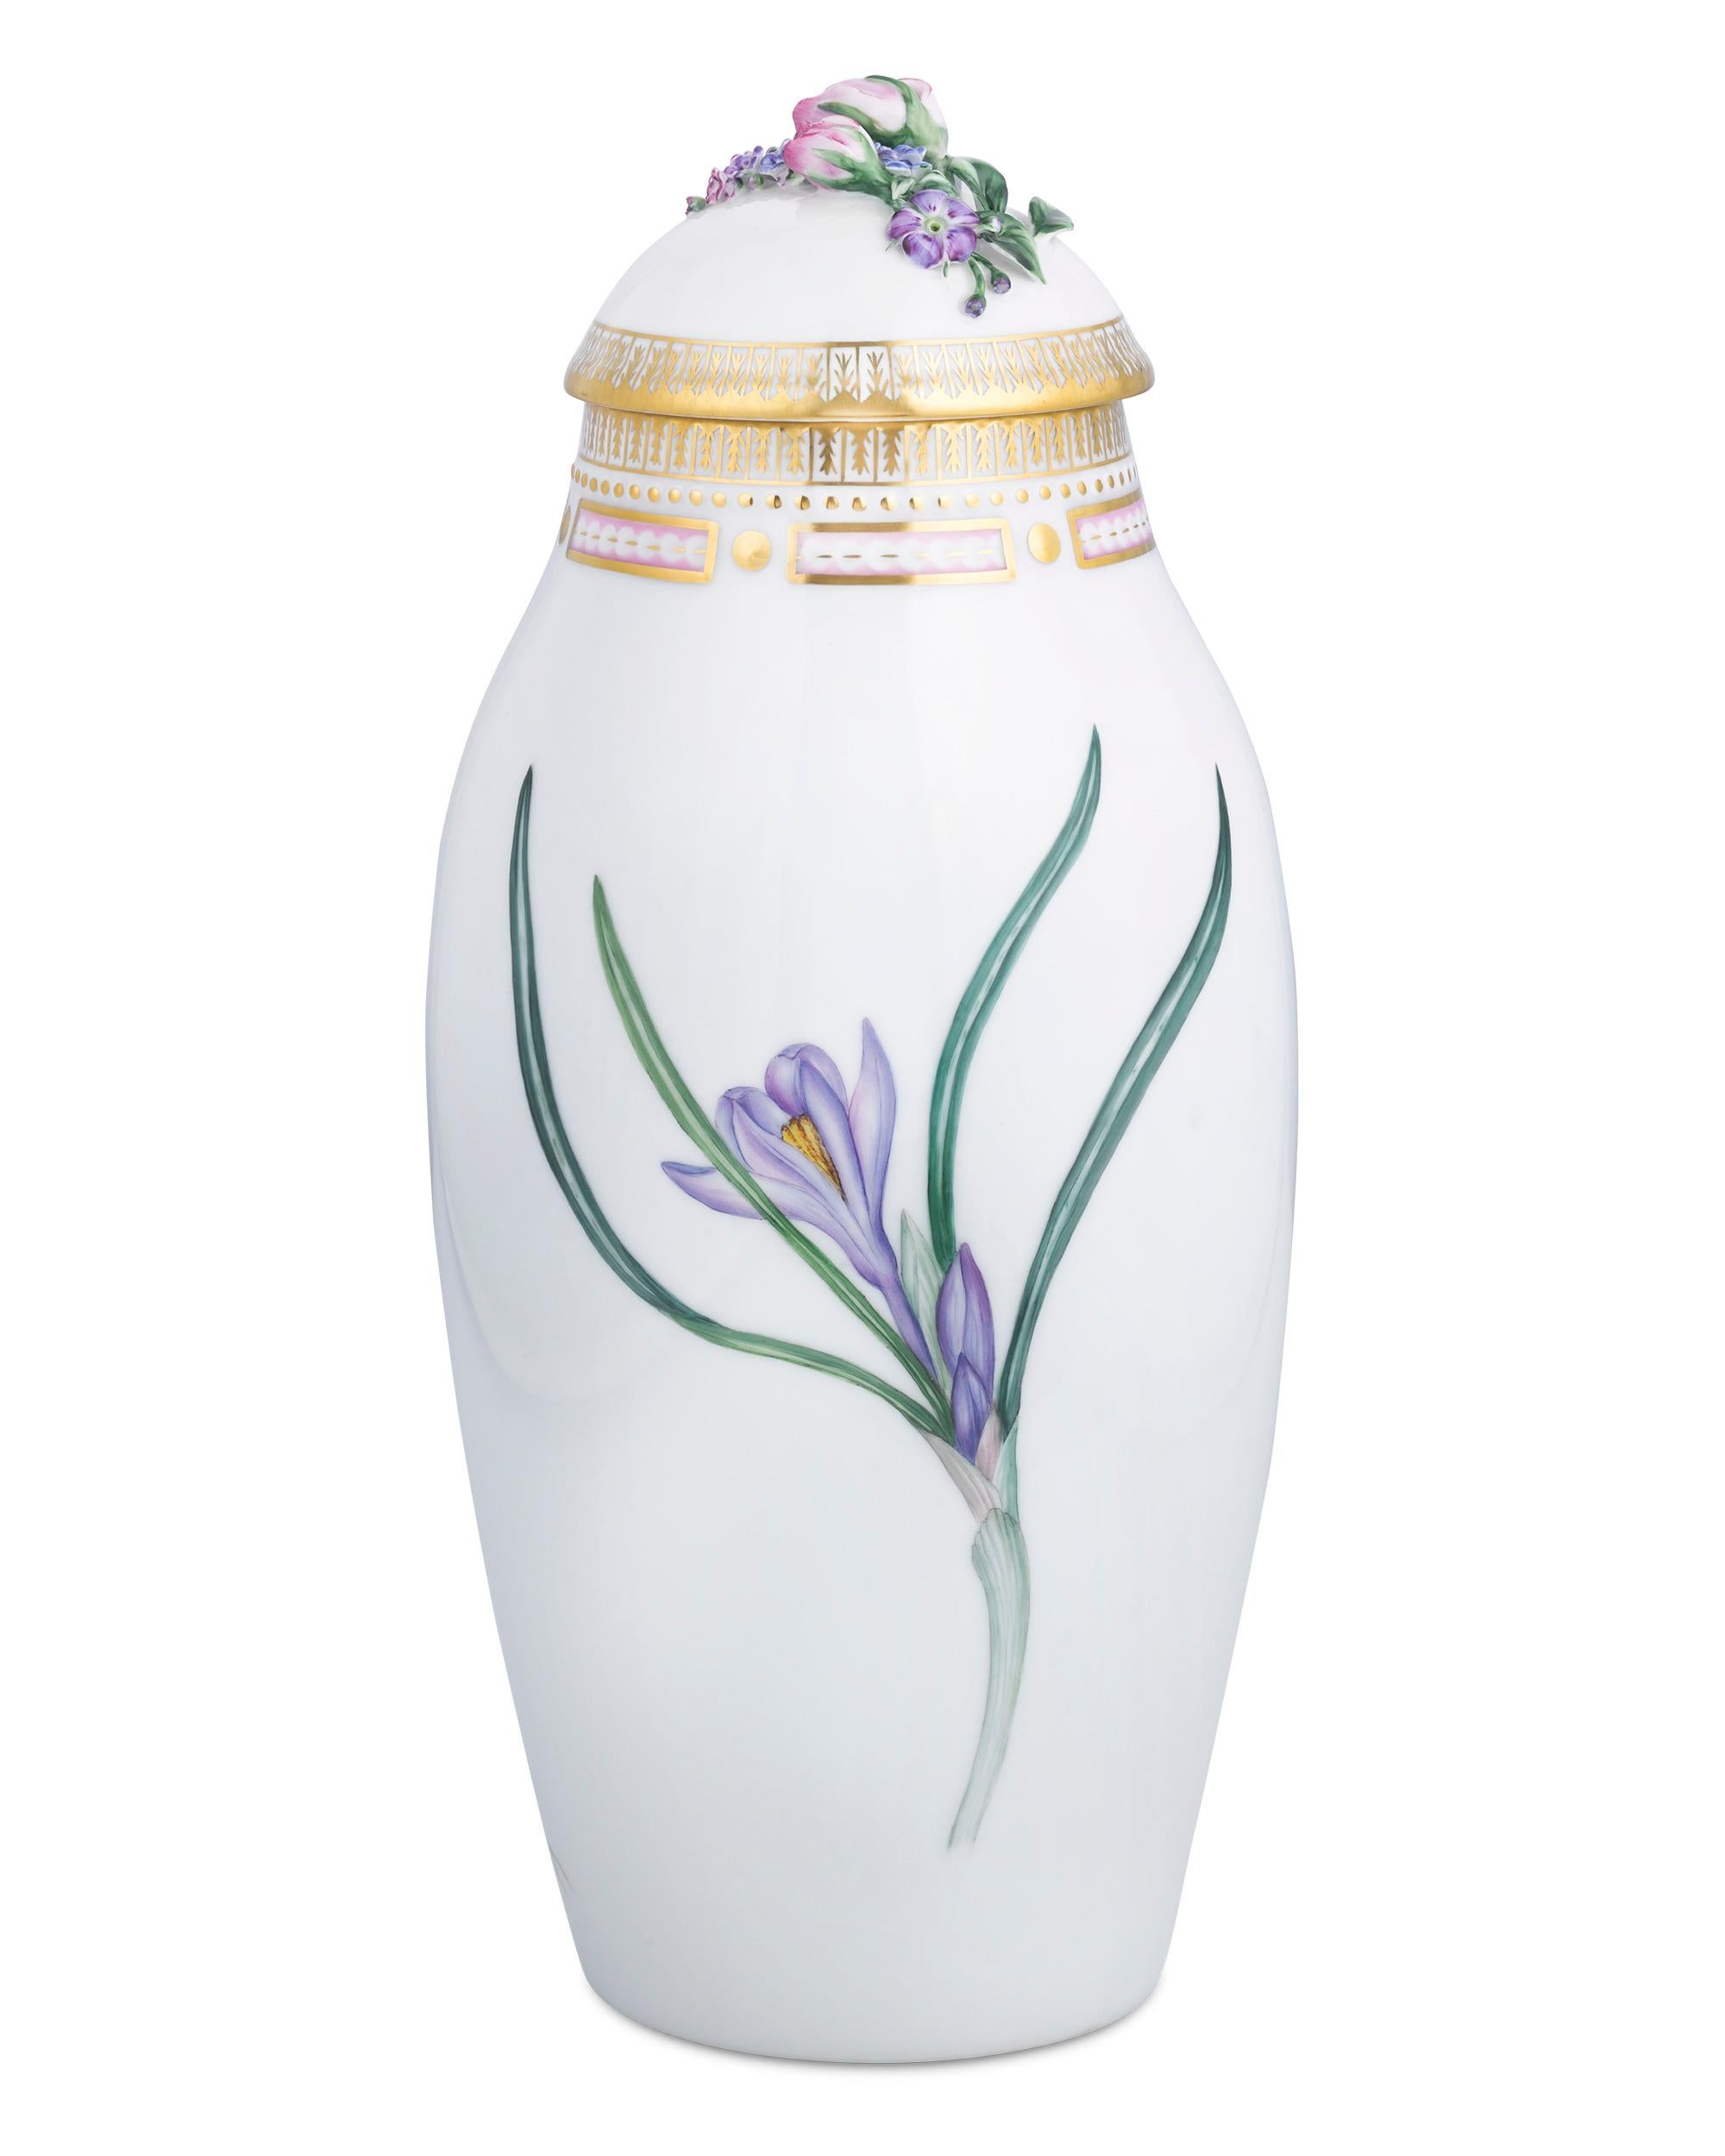 Crafted by Royal Copenhagen, this lidded ginger jar features one of the most prestigious porcelain patterns ever produced — the coveted Flora Danica pattern. The jar is rarity in the Flora Danica catalog in that it displays not one, but three